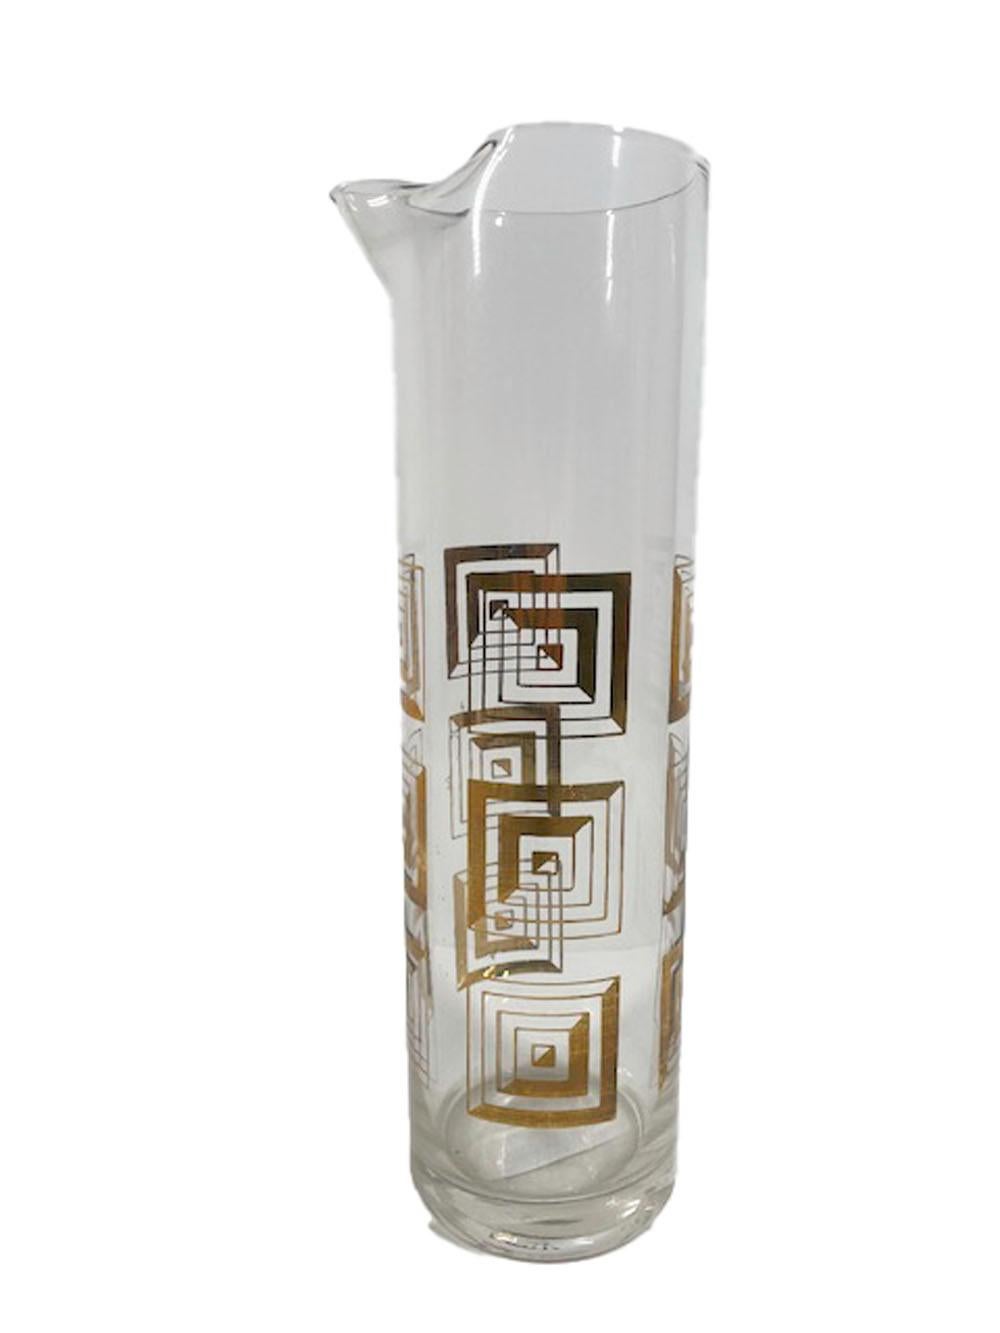 Seven piece Mid-Century Modern cocktail pitcher set decorated with concentric 22 karat gold squares divided diagonally with half narrow lines and half thick lines creating an optical effect.